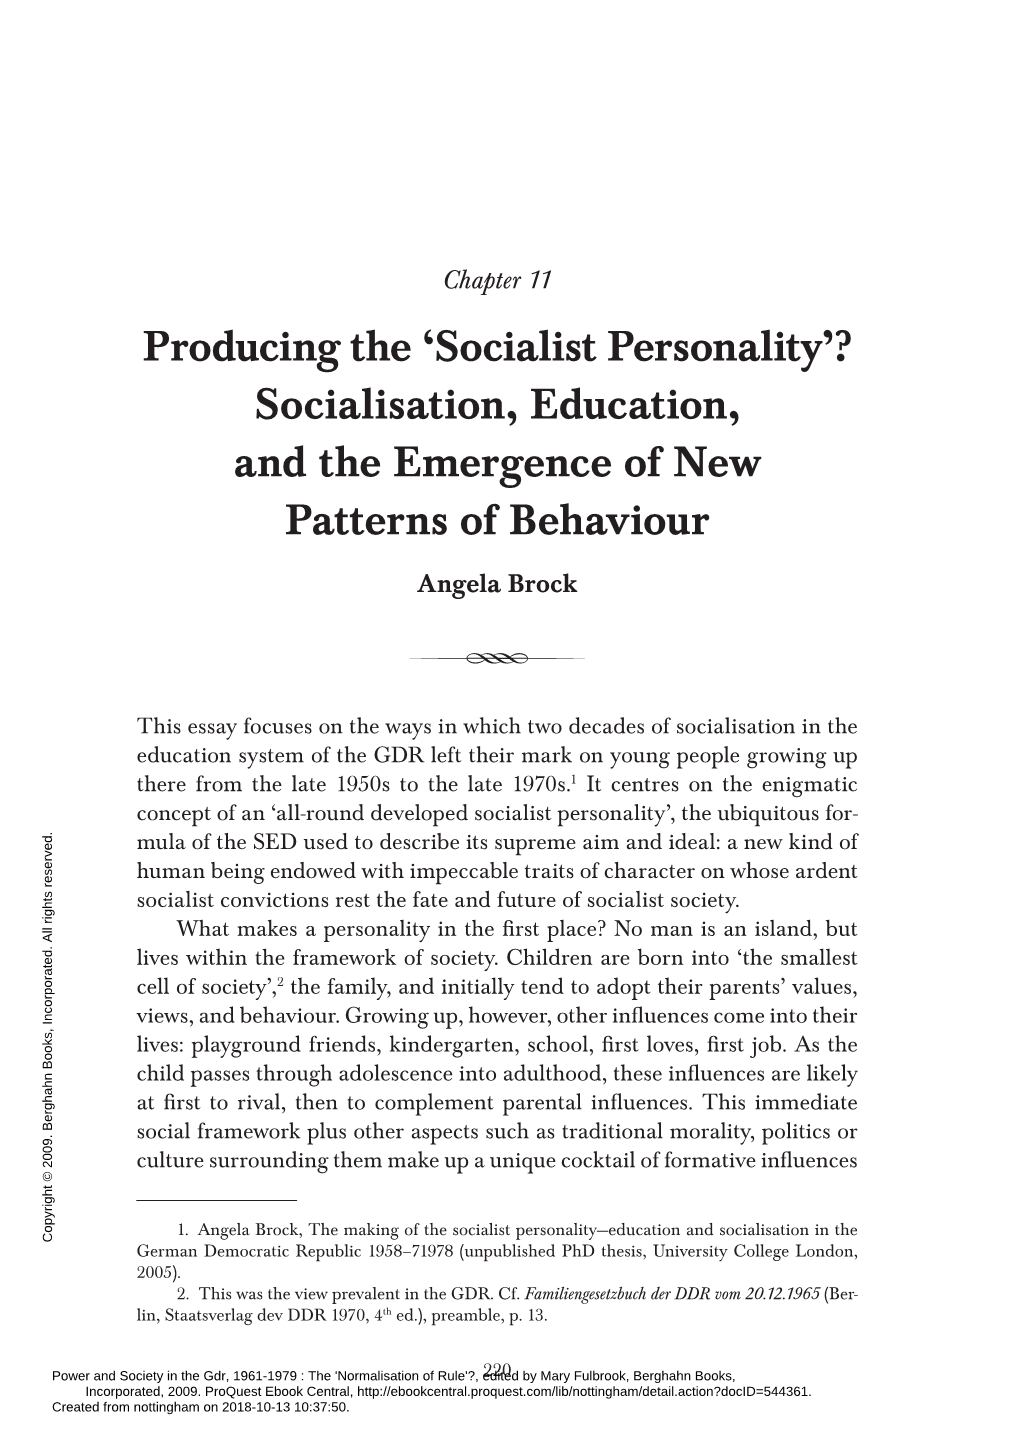 Producing the 'Socialist Personality'? Socialisation, Education, and The